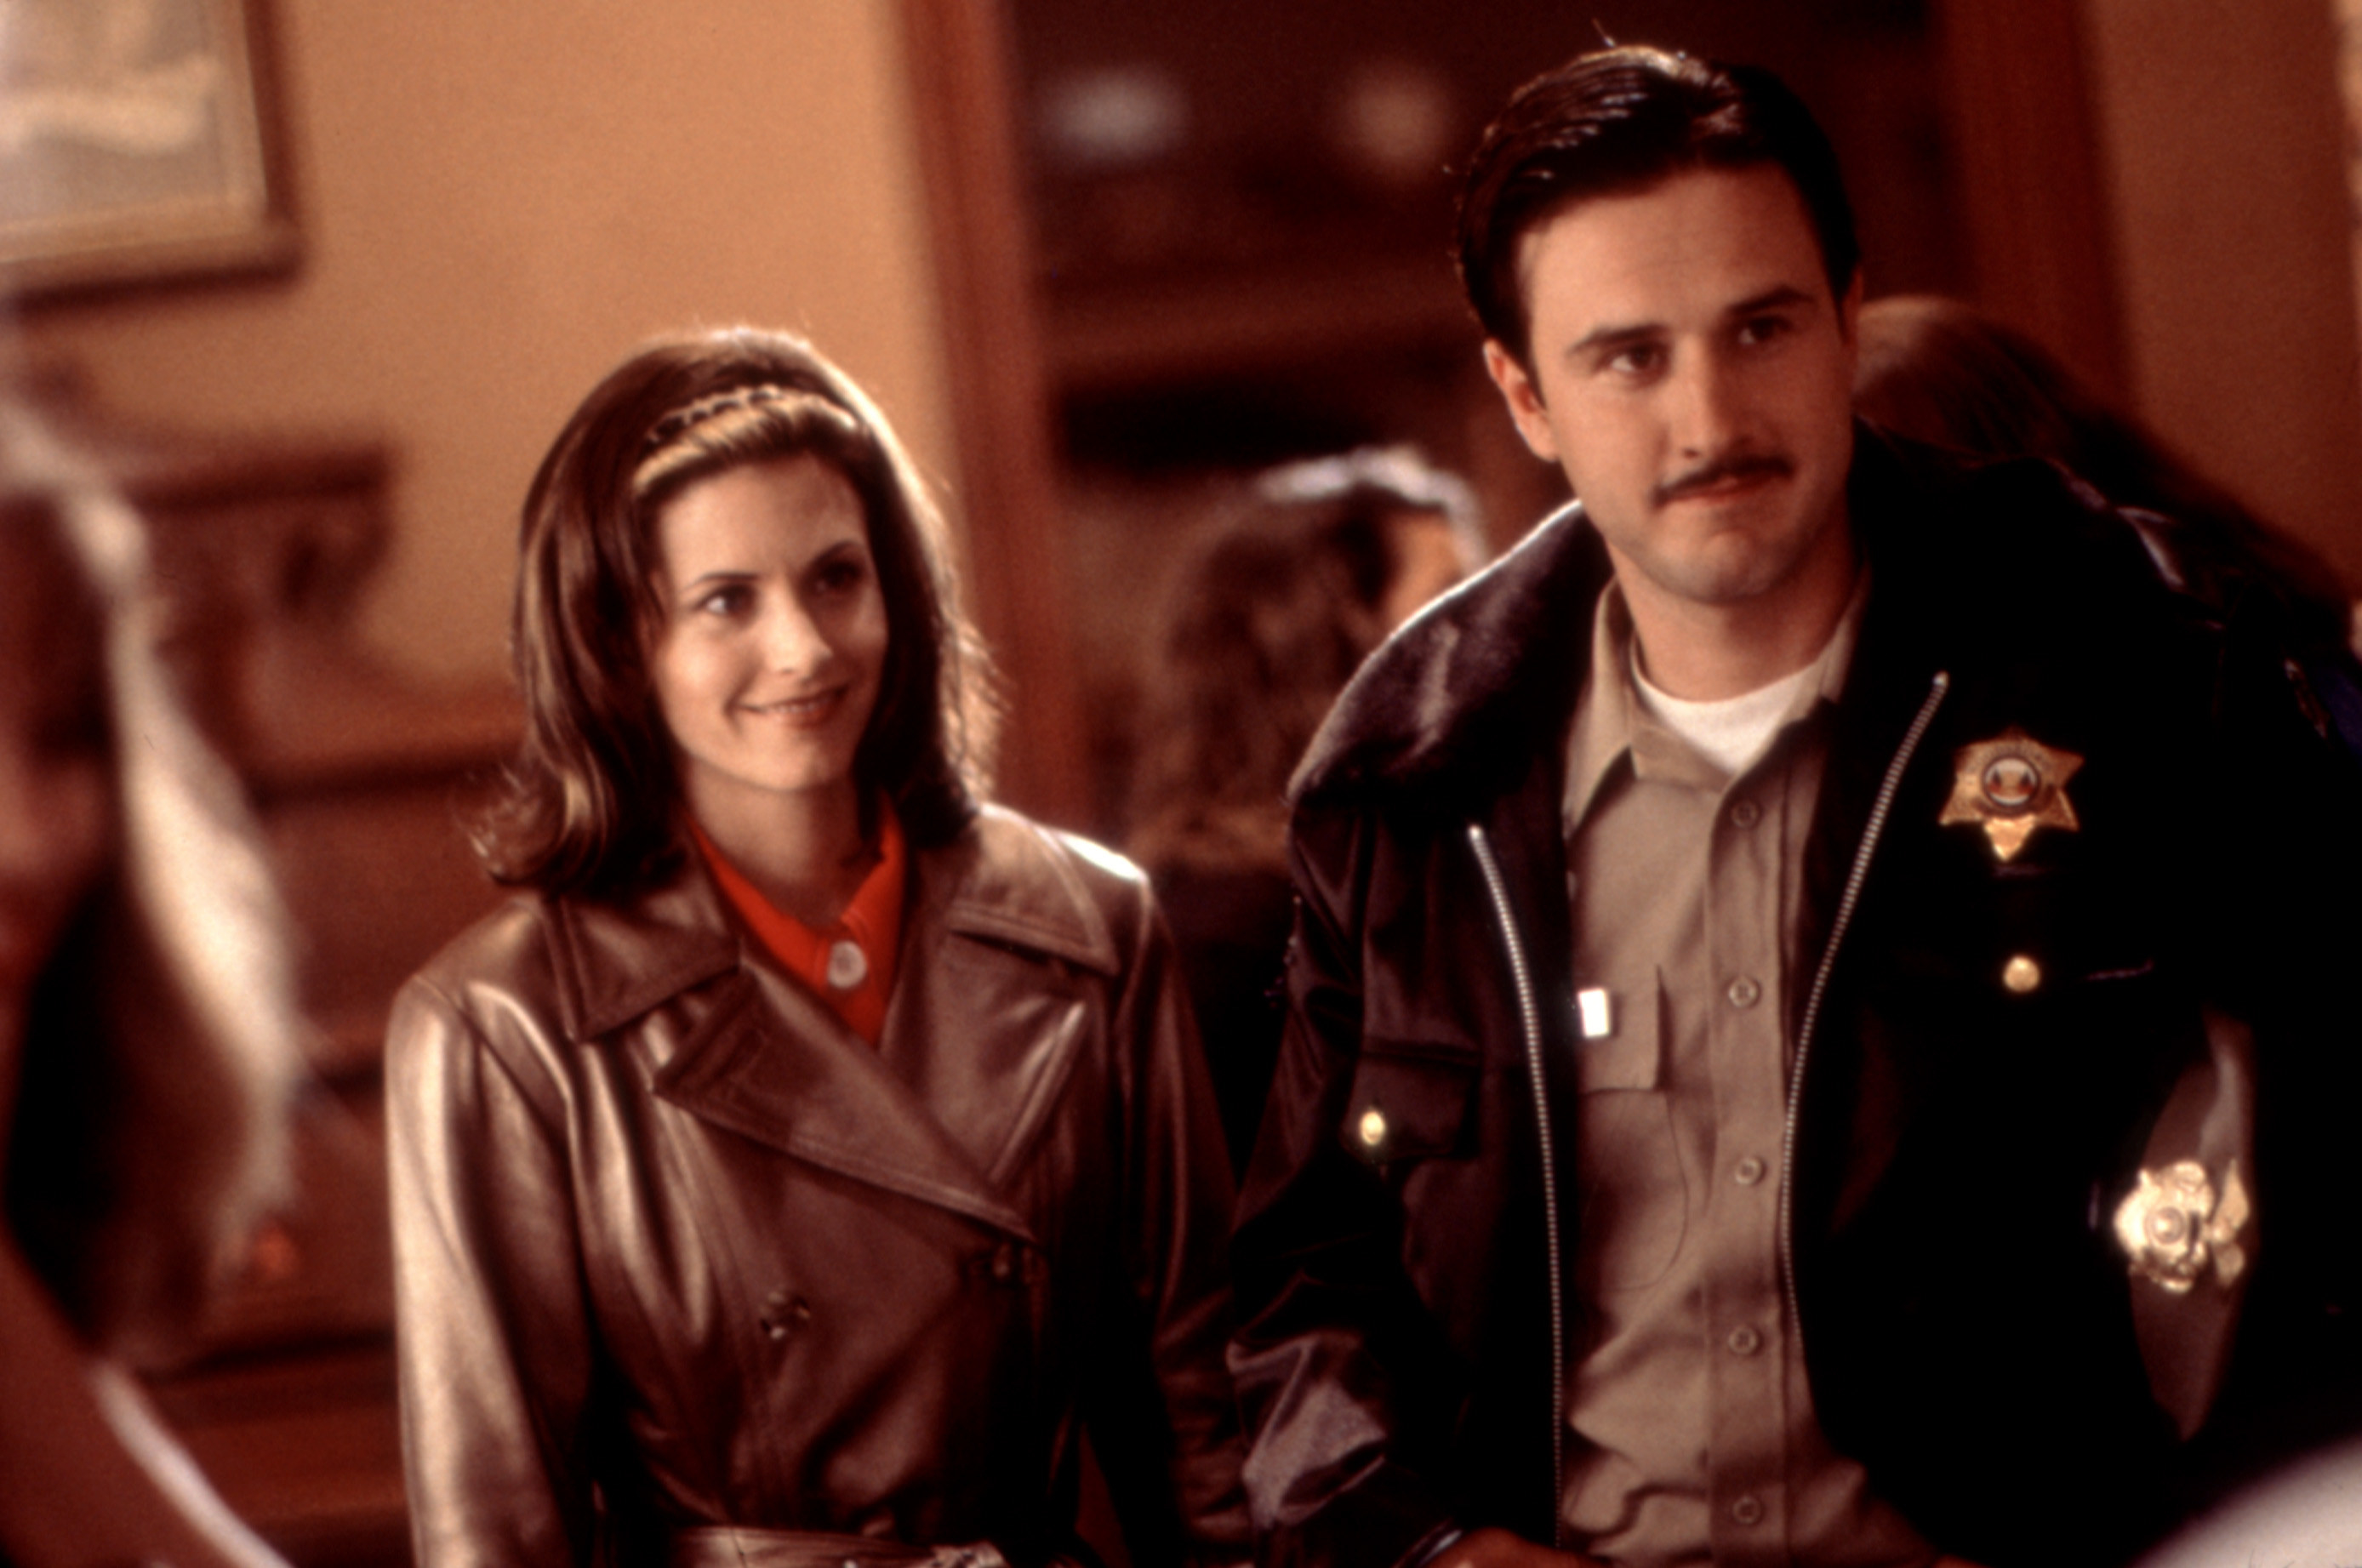 Courteney and David stand side by side in the movie